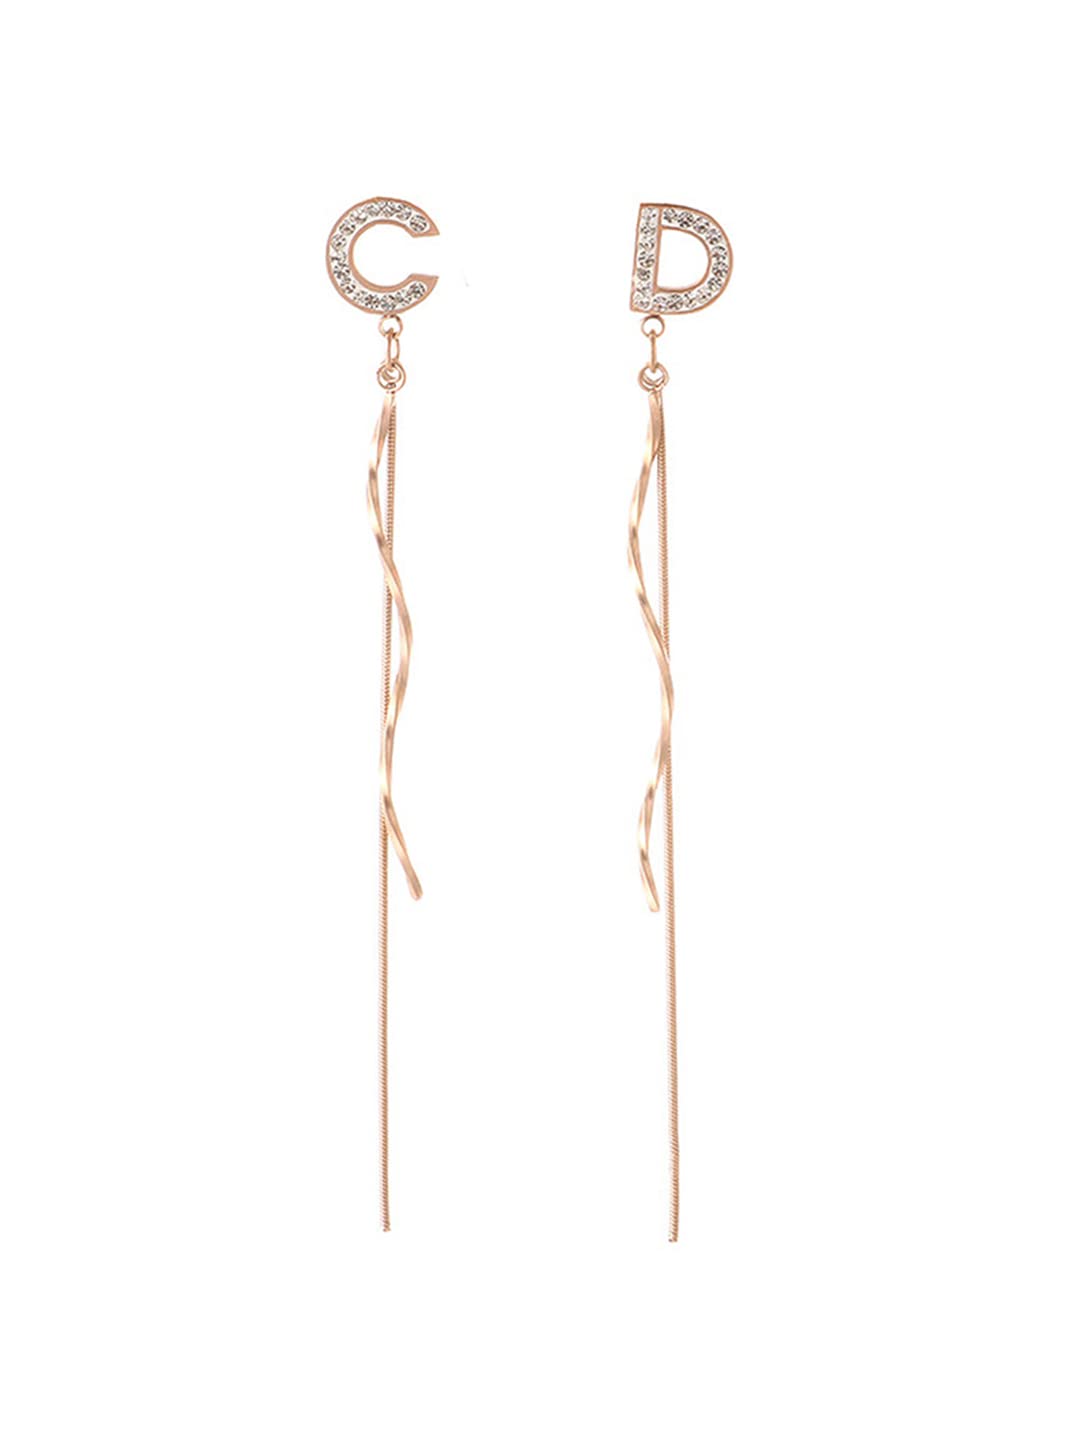 Yellow Chimes Danglers Earrings for Women Rose Gold Plated Stainless Steel C & D Letter Mismatched Danglers Earrings For Women and Girls